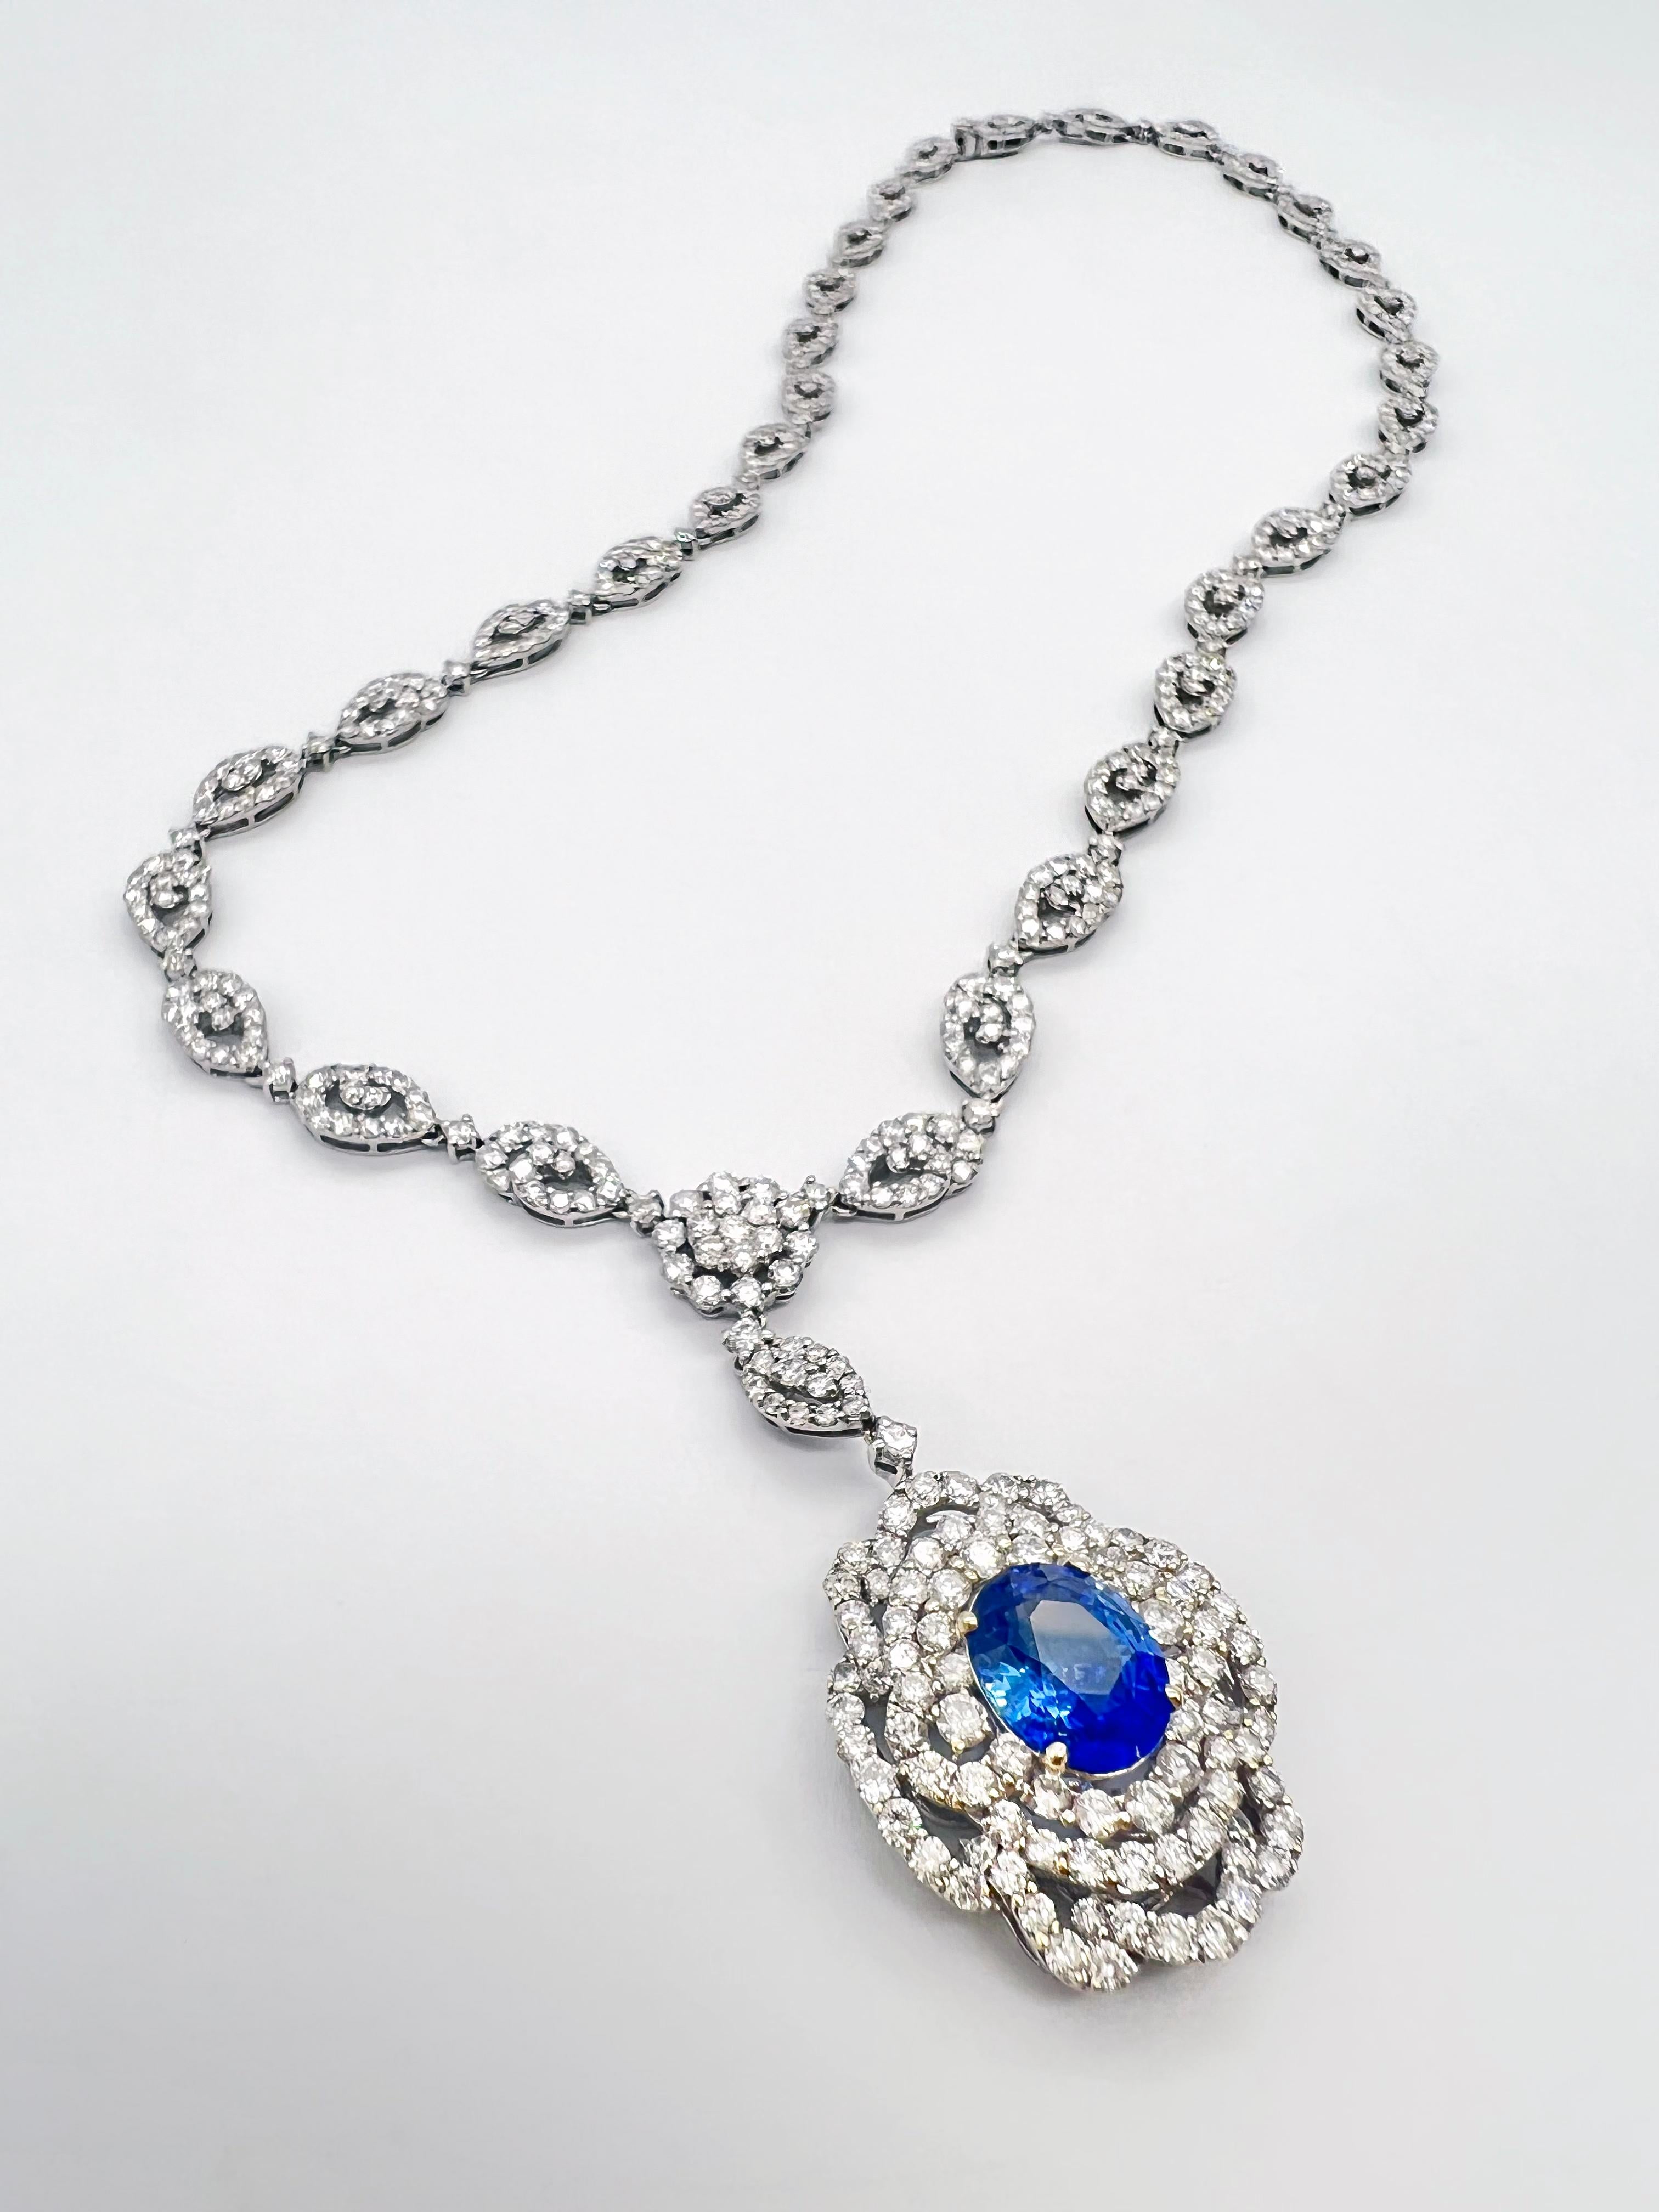 17.17 Total Carat Sapphire and Diamond White Gold Pendant Necklace, GIA Certified

This stunning necklace showcases a single 3.05 Carat Ceylon Sapphire stone known for its durability and its notion of eternality. The sapphire and diamonds are set in